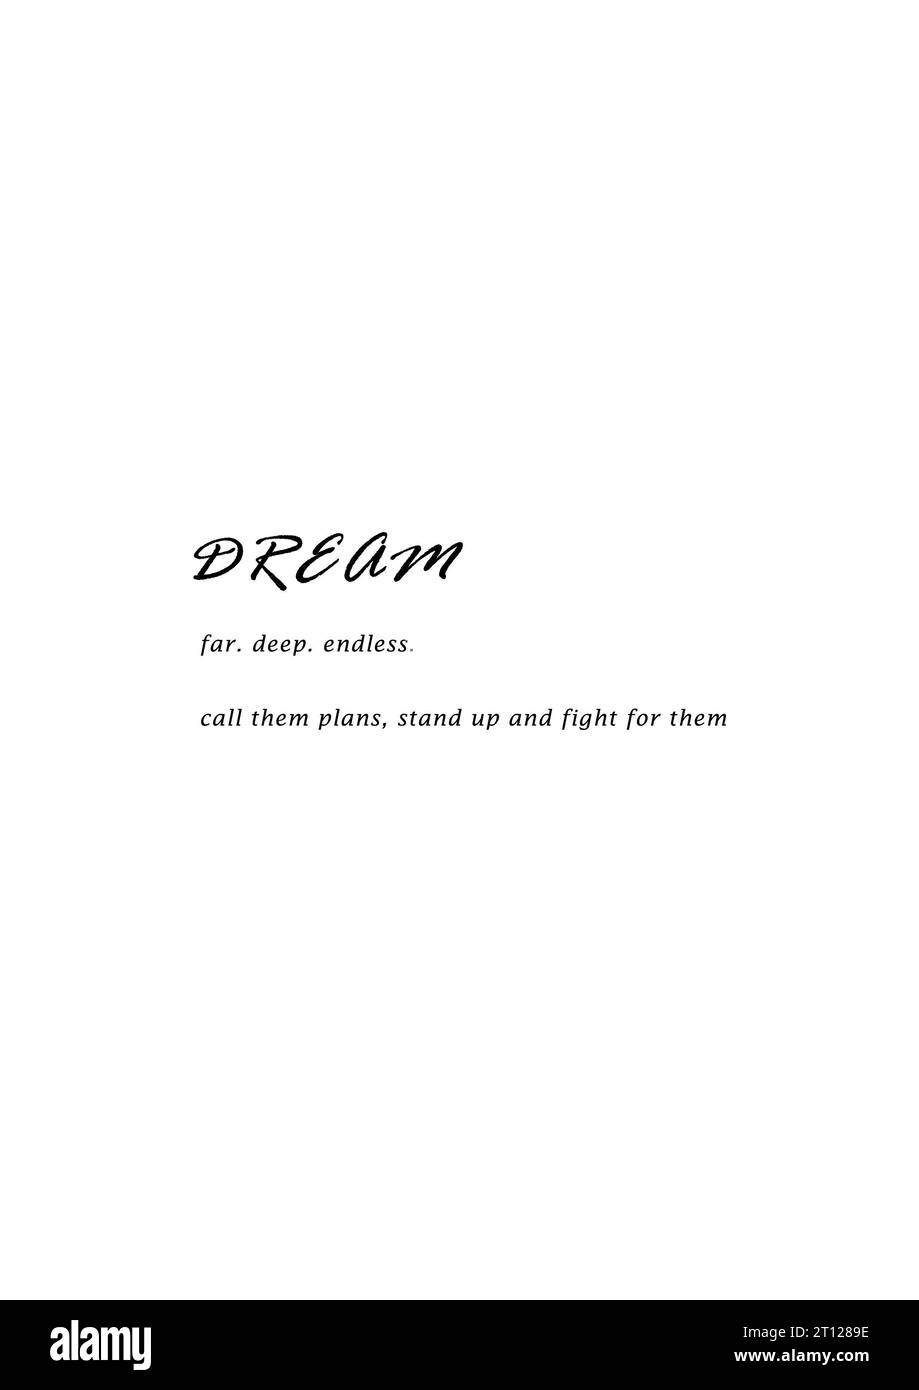 Texte Sprüche Quotes Dream far deep endless call them plans stand up and fight for them Stock Photo